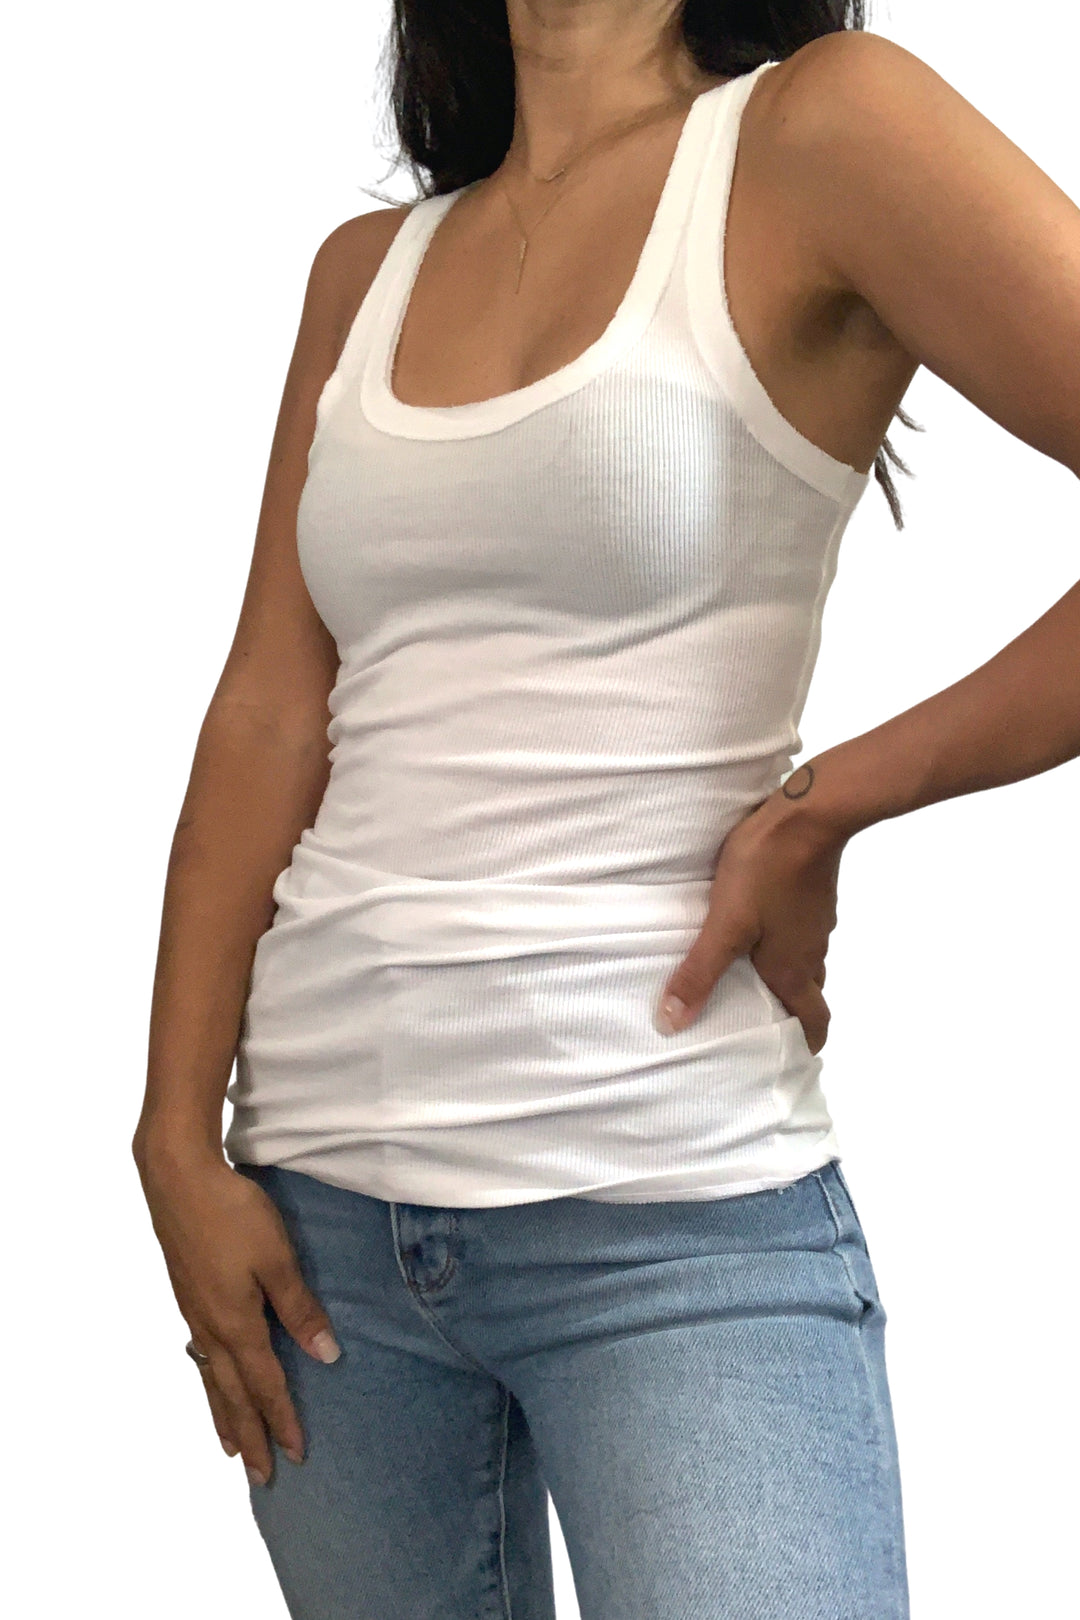 RAW EDGE TANK-SOLID - Kingfisher Road - Online Boutique